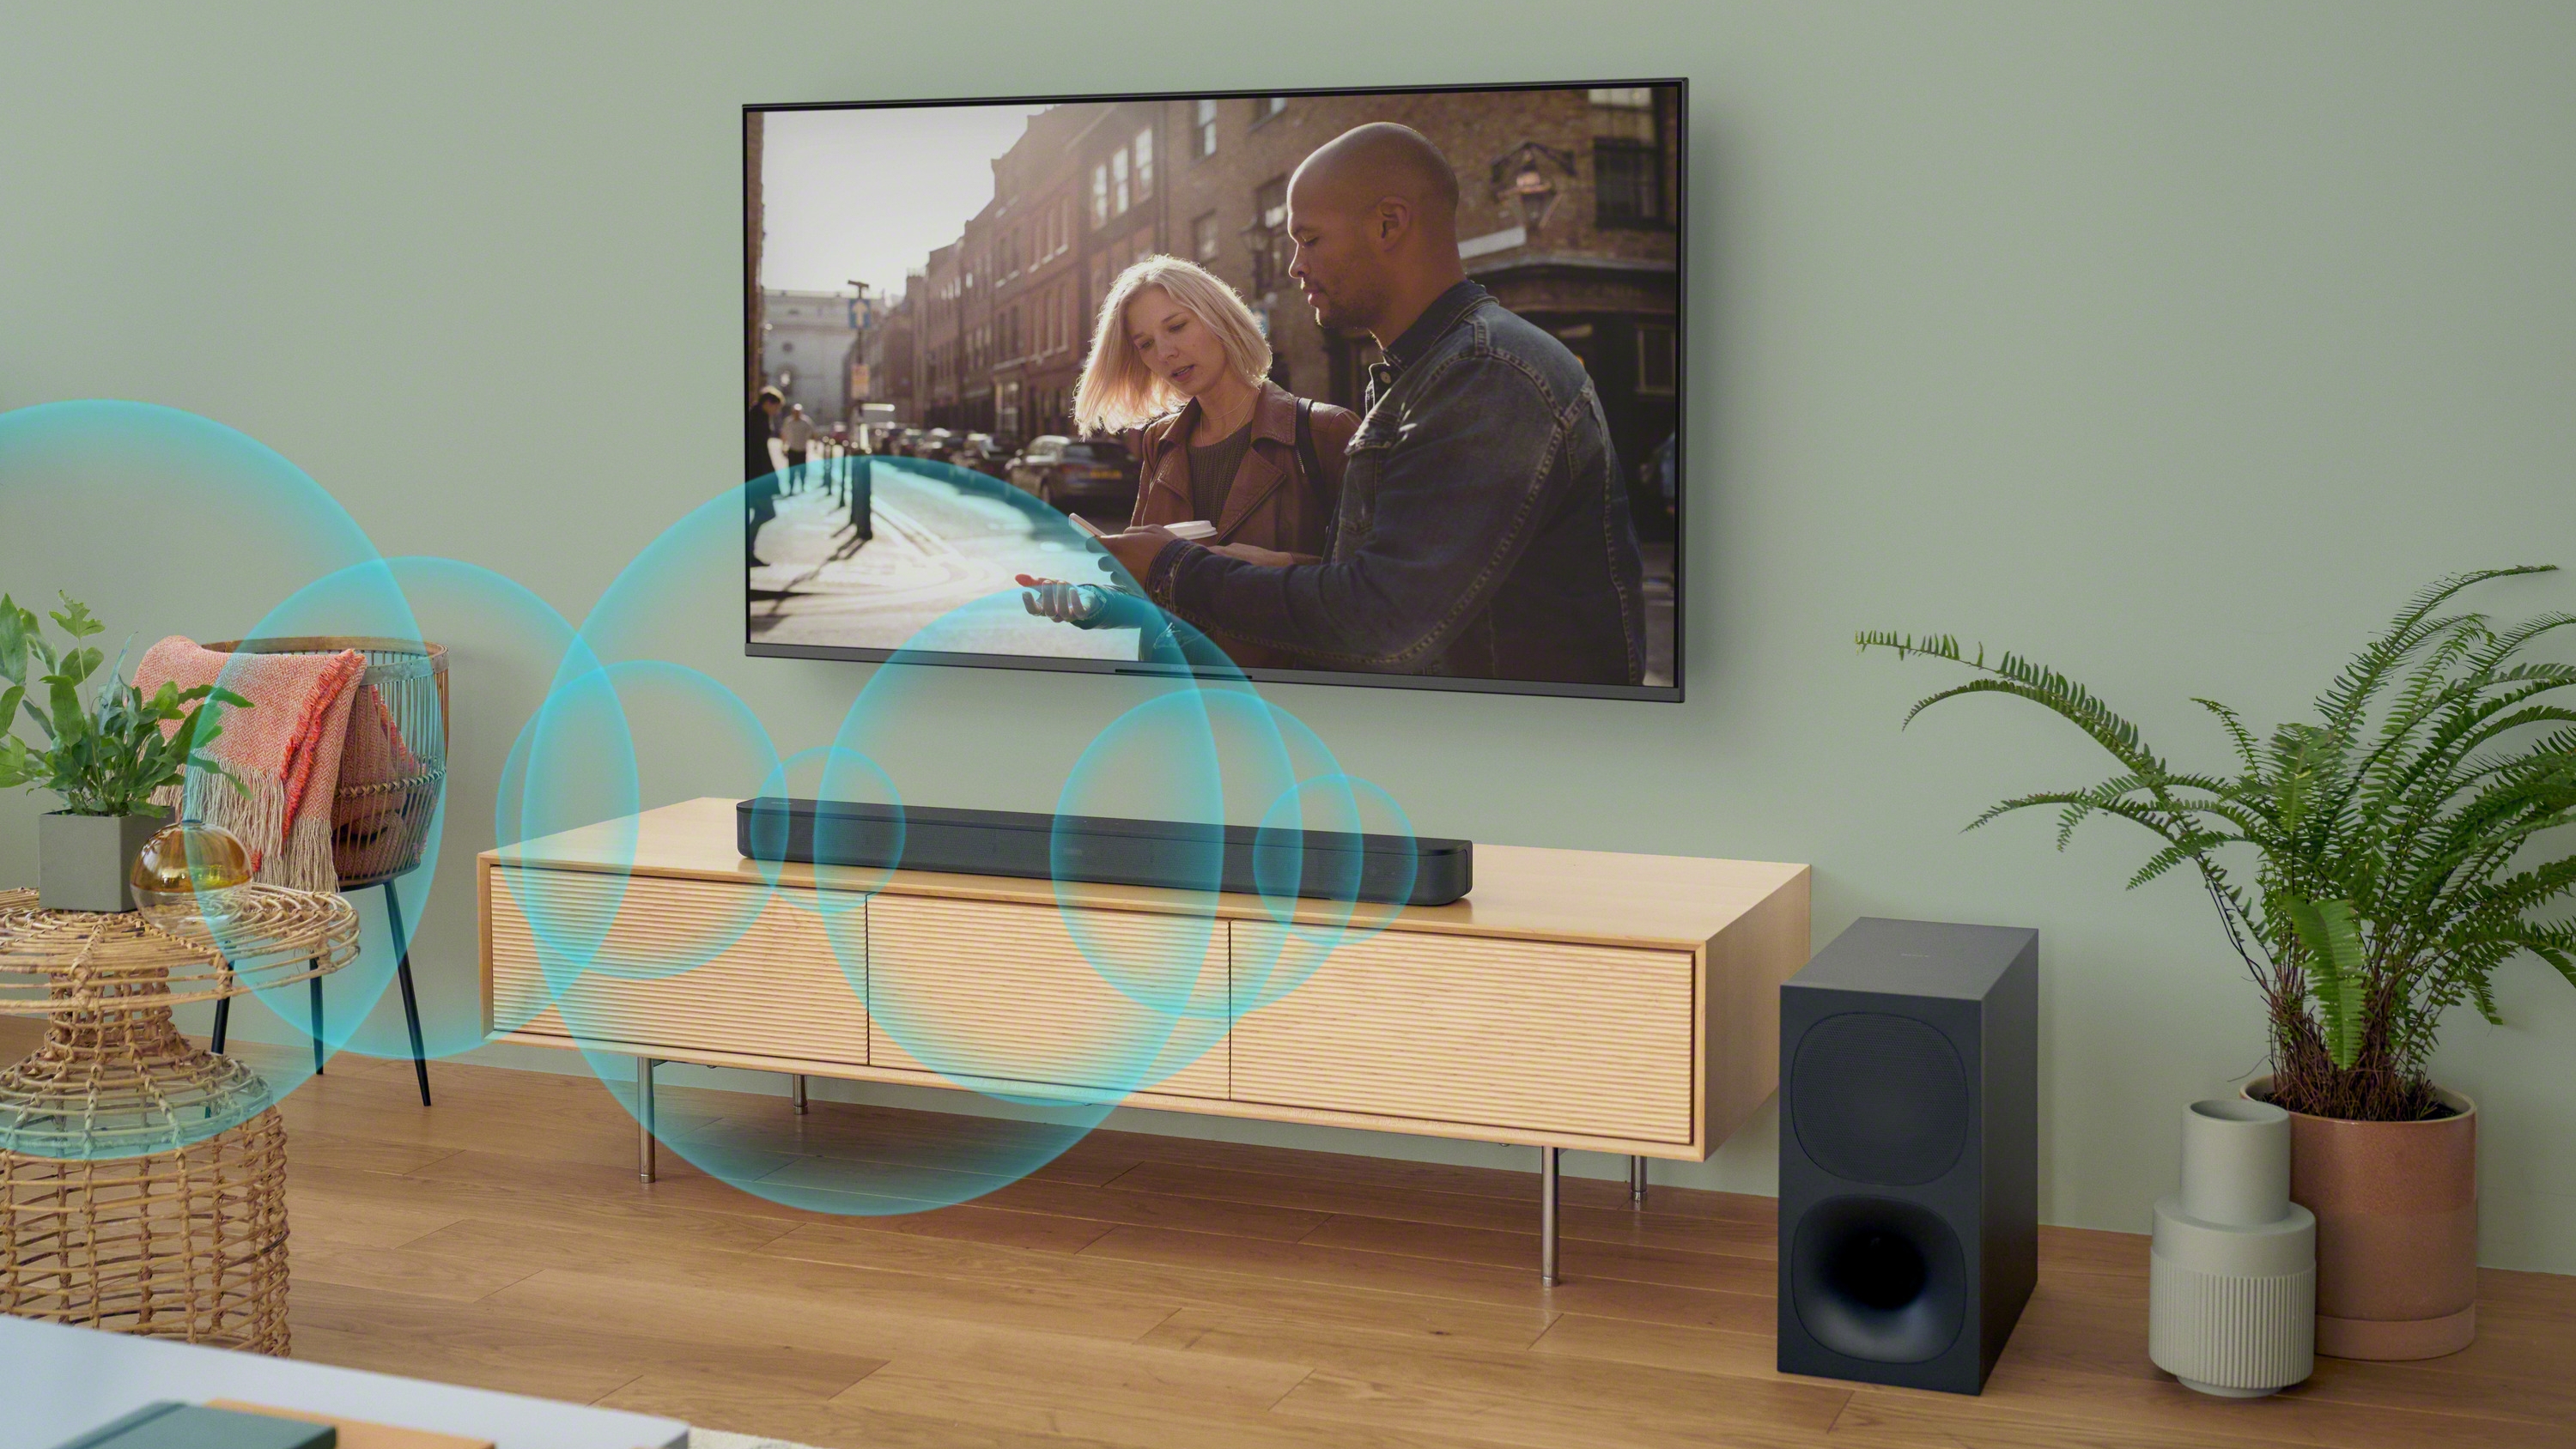 This new Sony soundbar offers 5.1 surround sound from a simple 2.1 